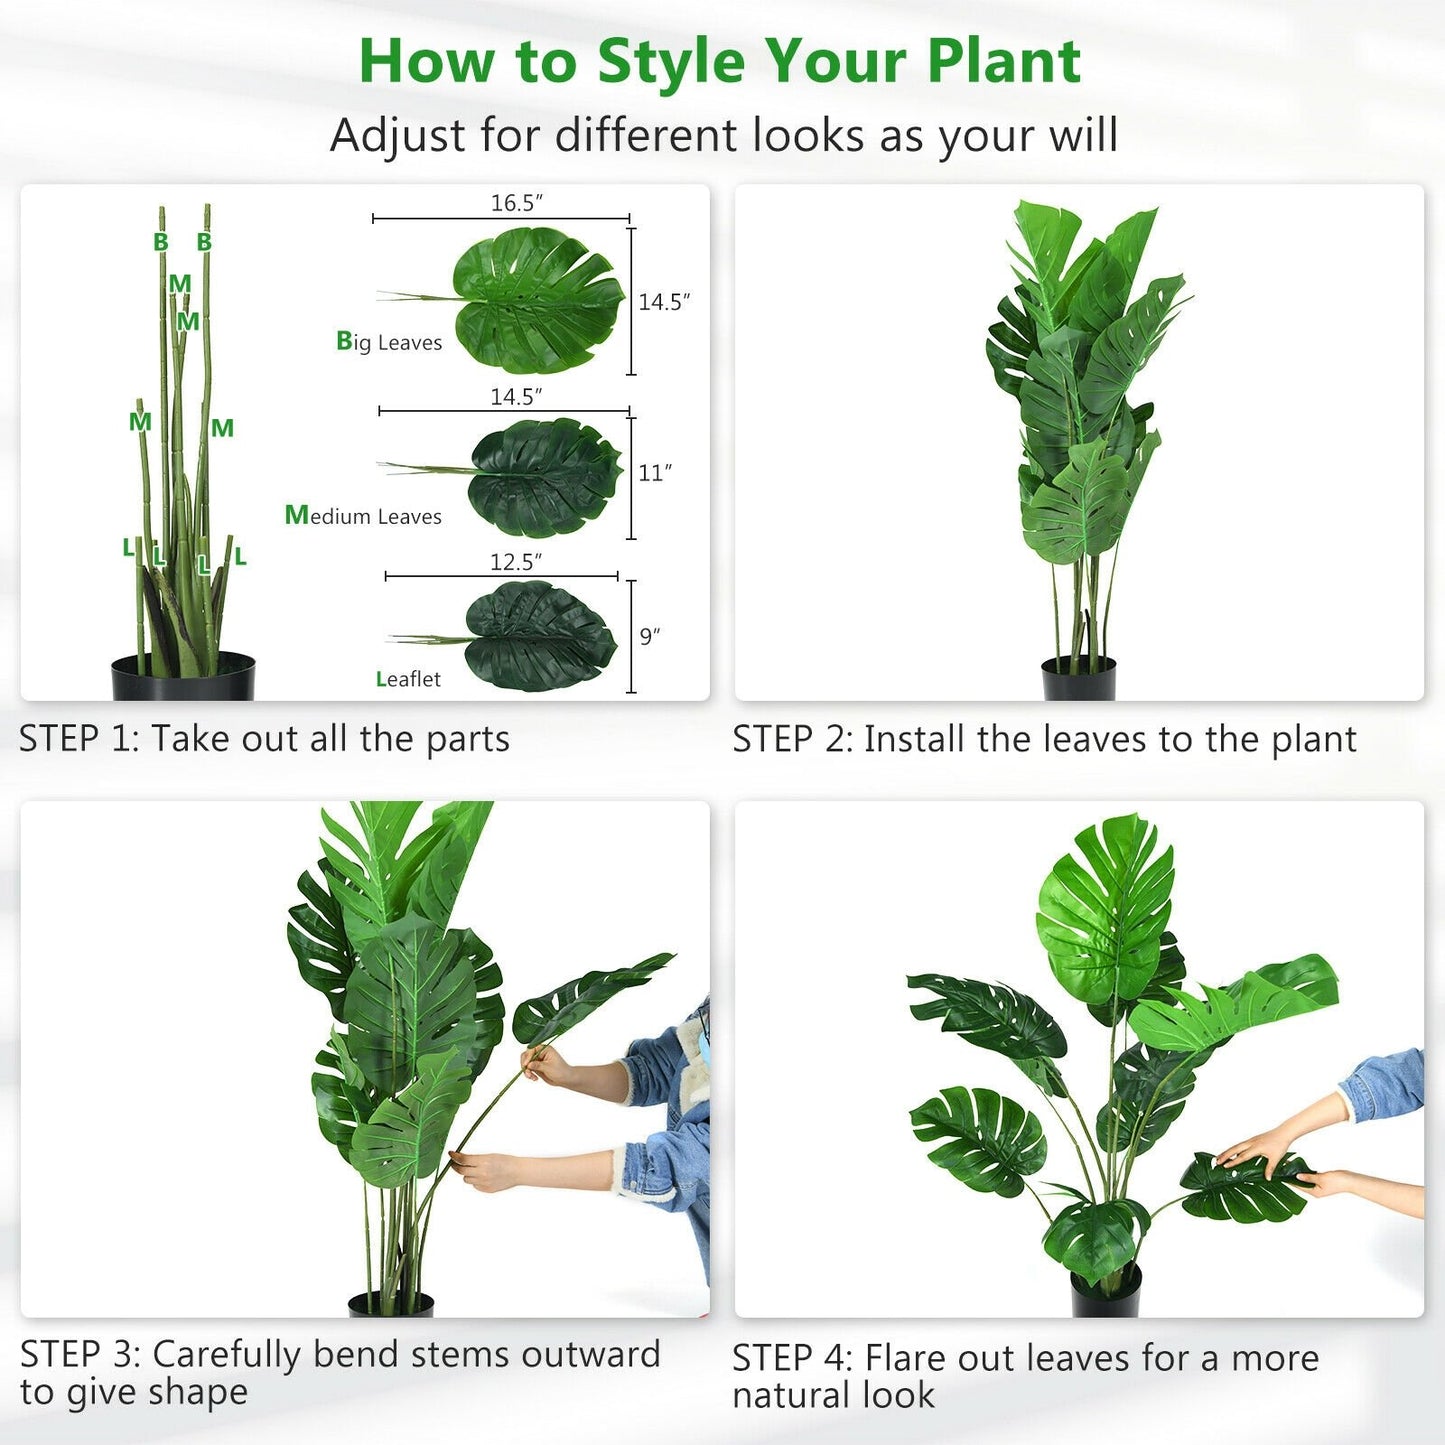 4 Feet Artificial Monstera Deliciosa Tree with 10 Leaves of Different Sizes, Green - Gallery Canada